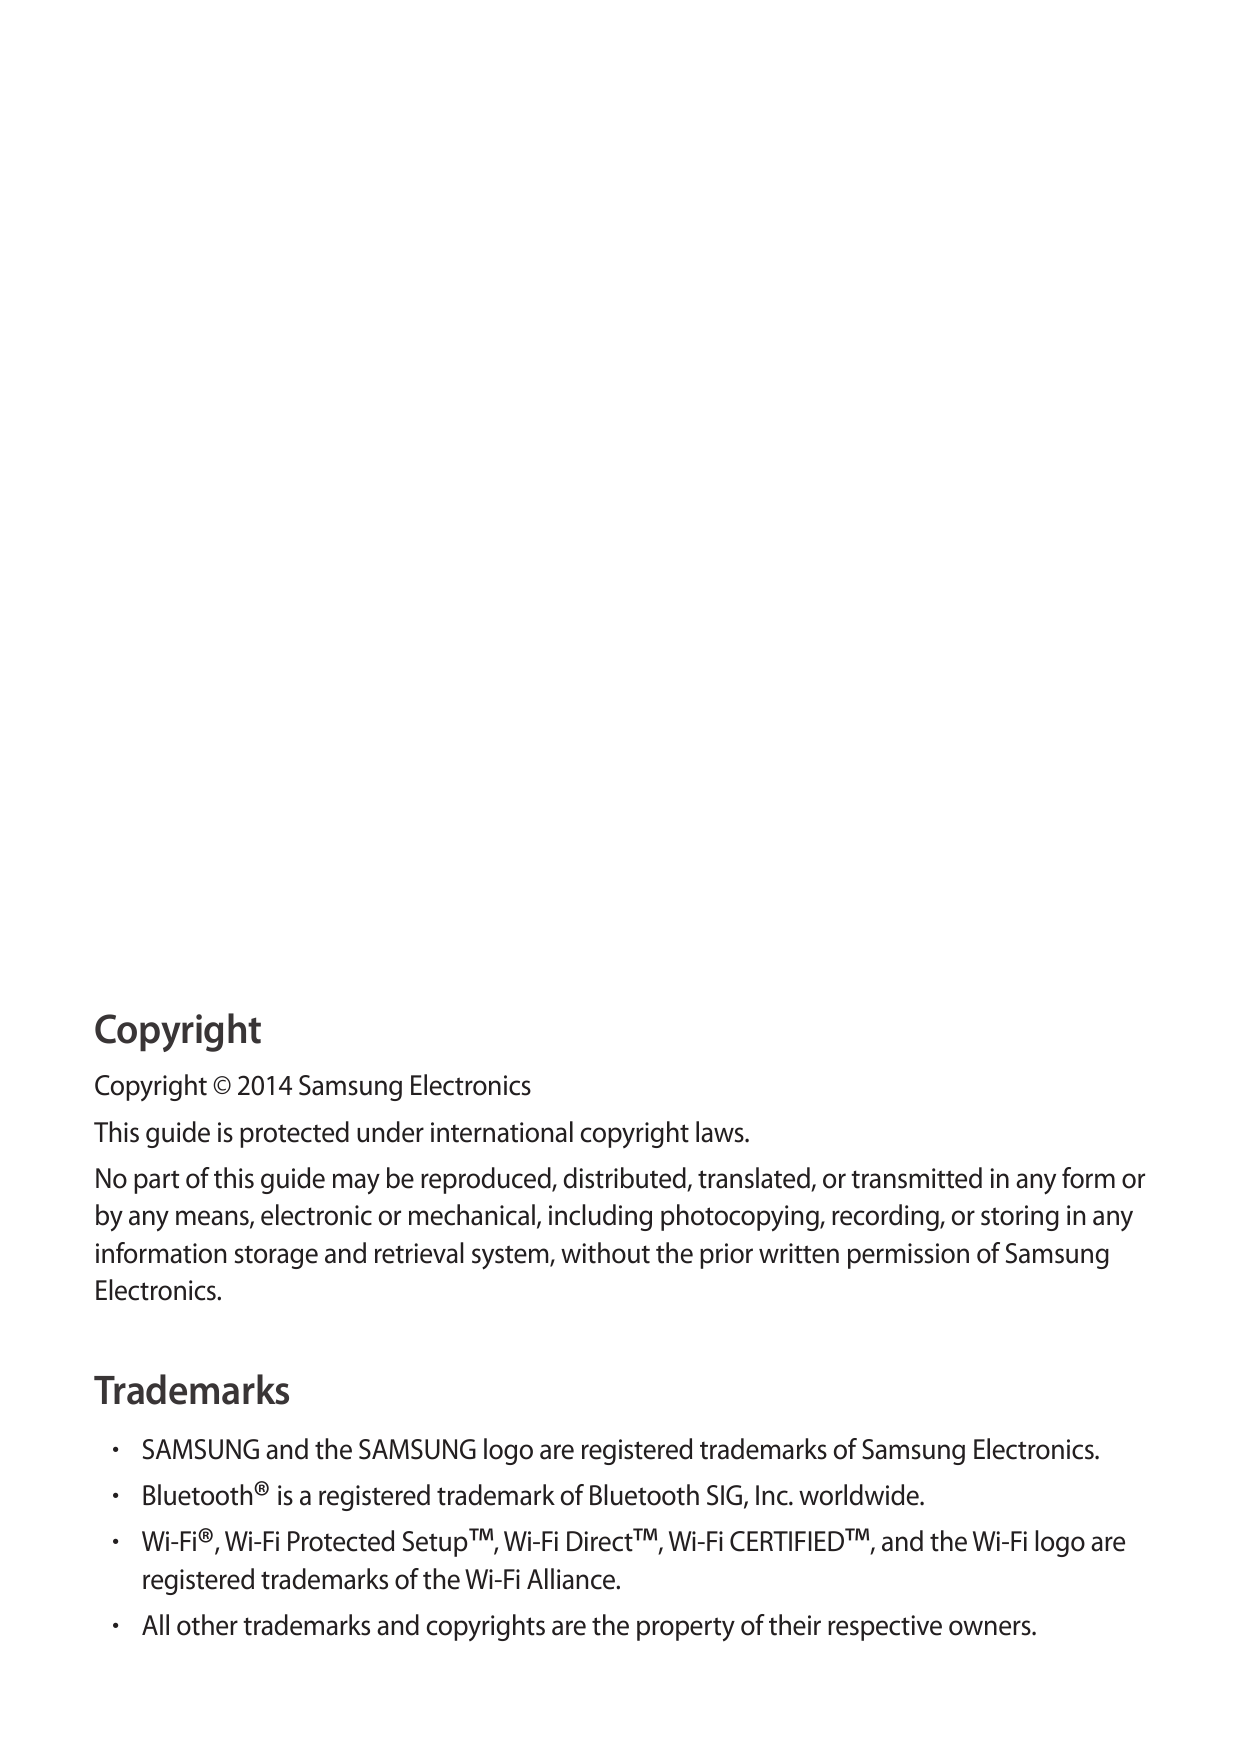 CopyrightCopyright © 2014 Samsung ElectronicsThis guide is protected under international copyright laws.No part of this guide ma